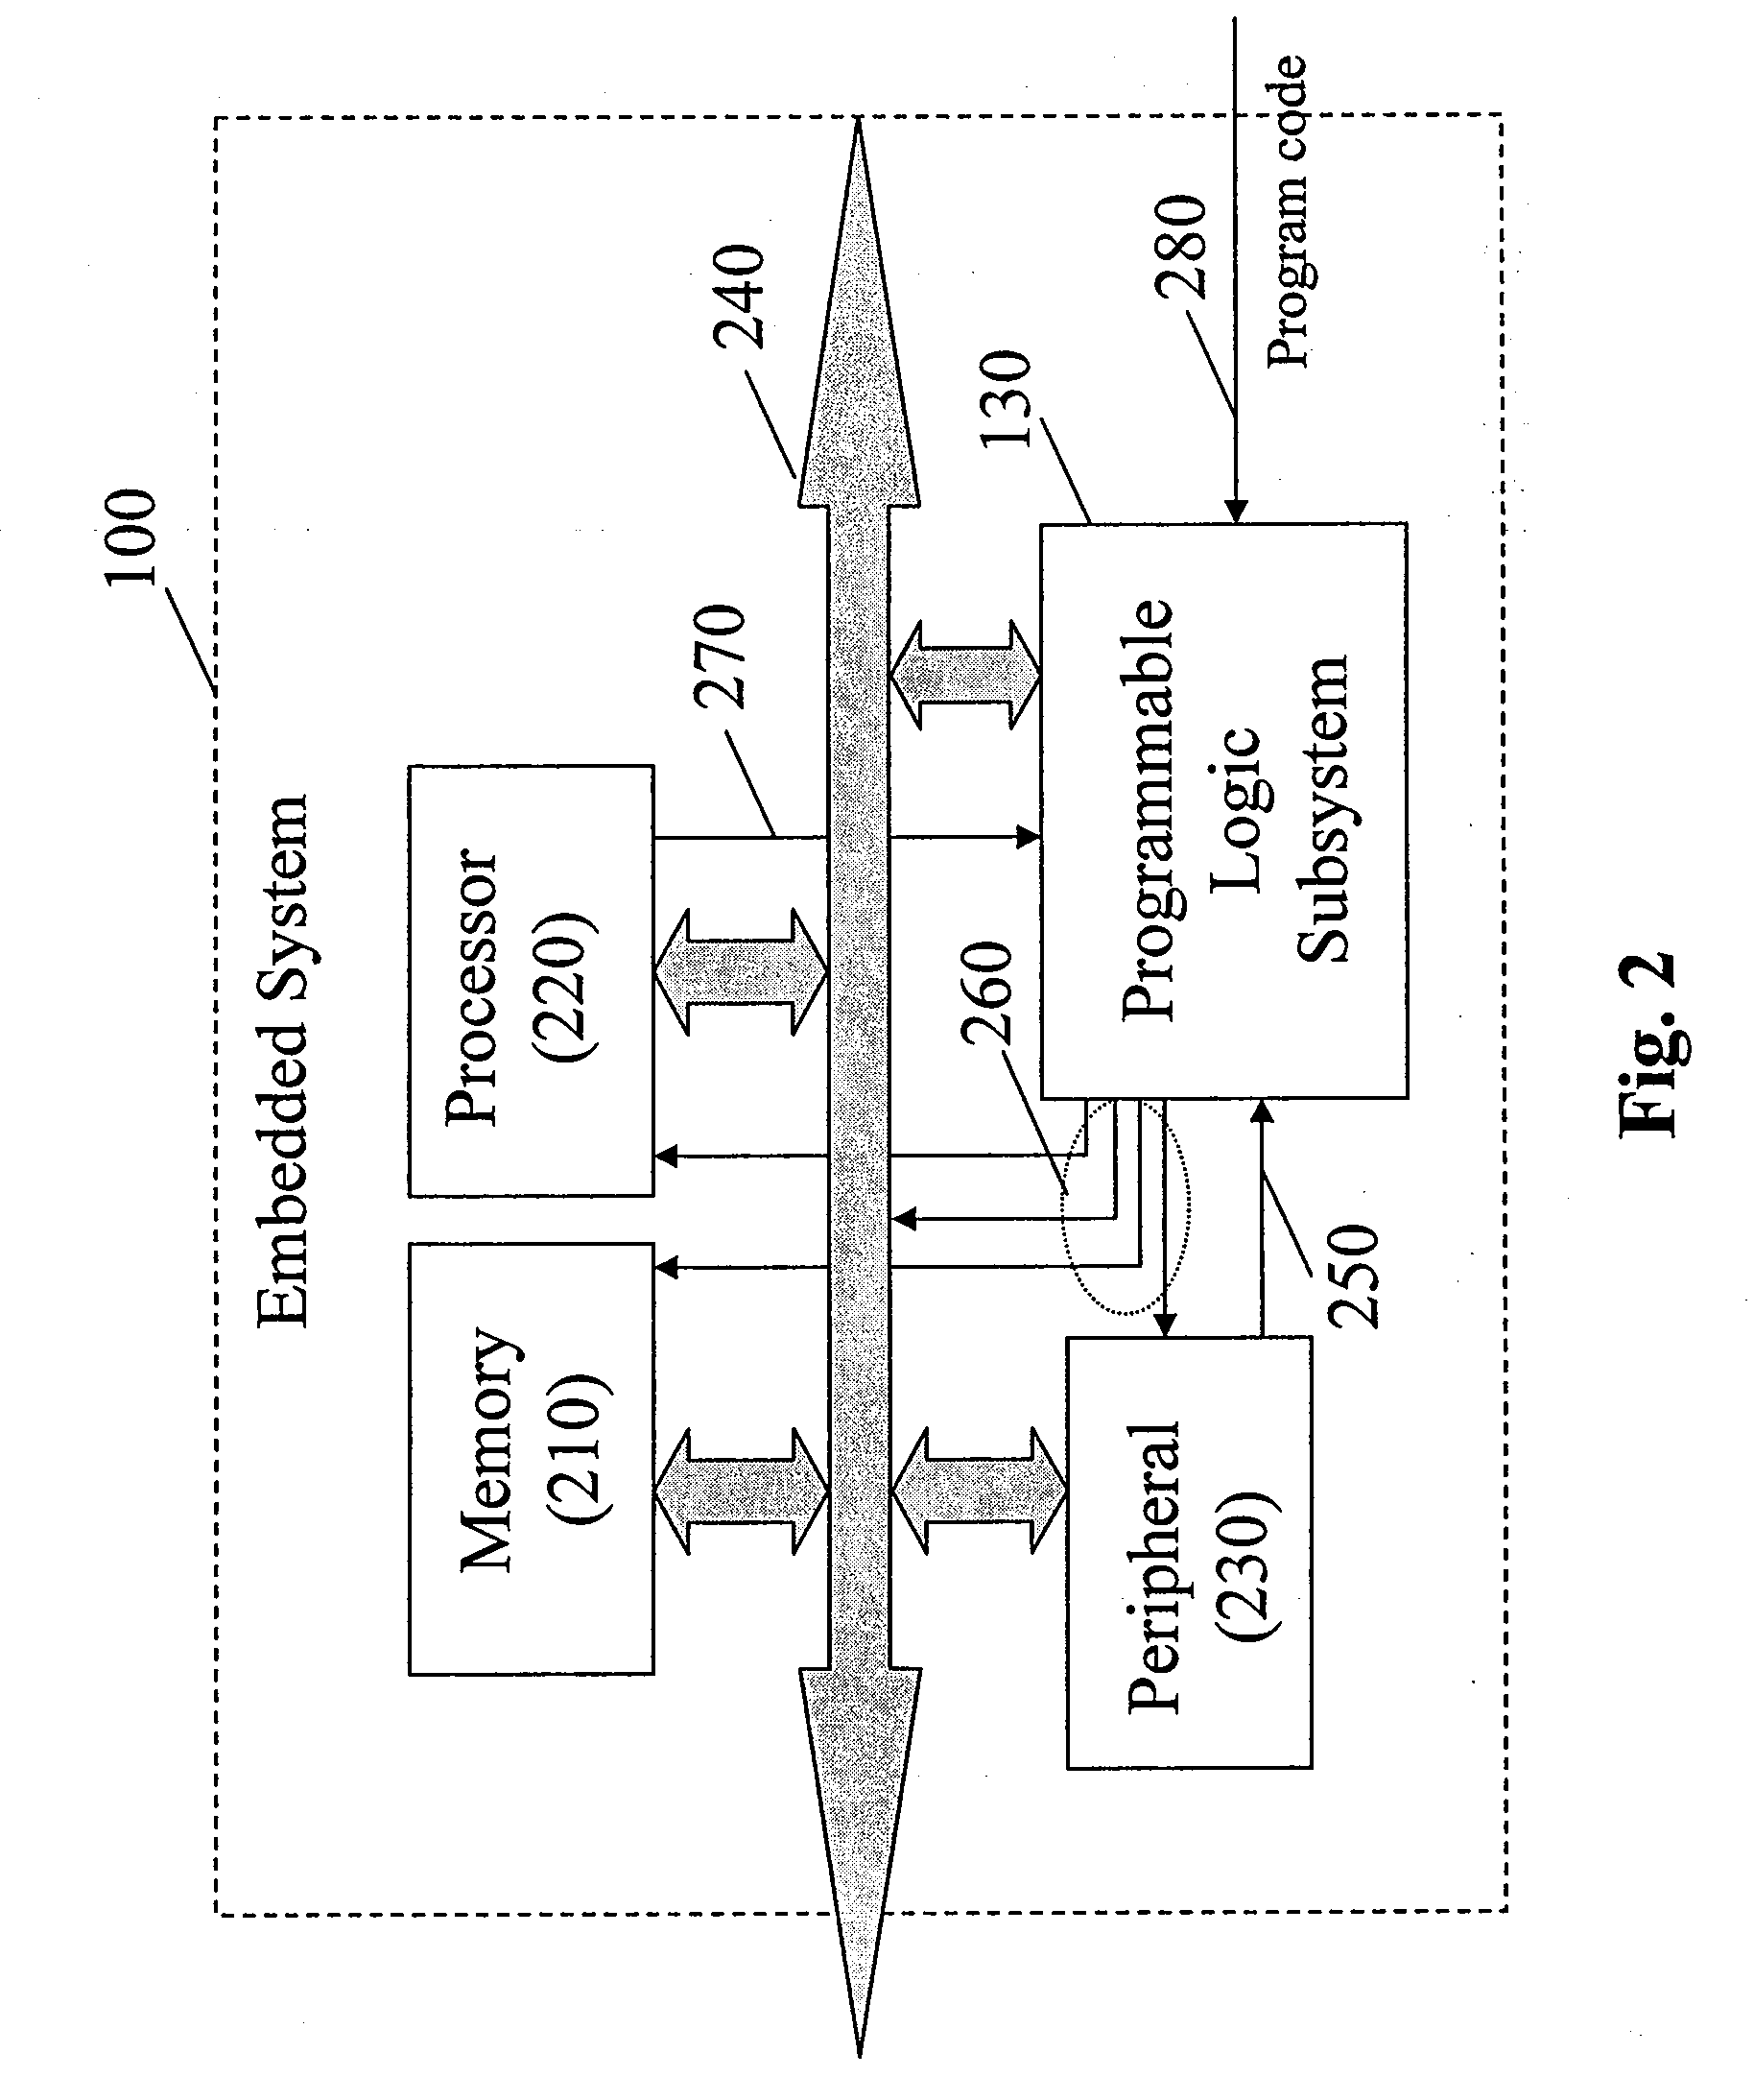 Method to secure embedded system with programmable logic, hardware and software binding, execution monitoring and counteraction